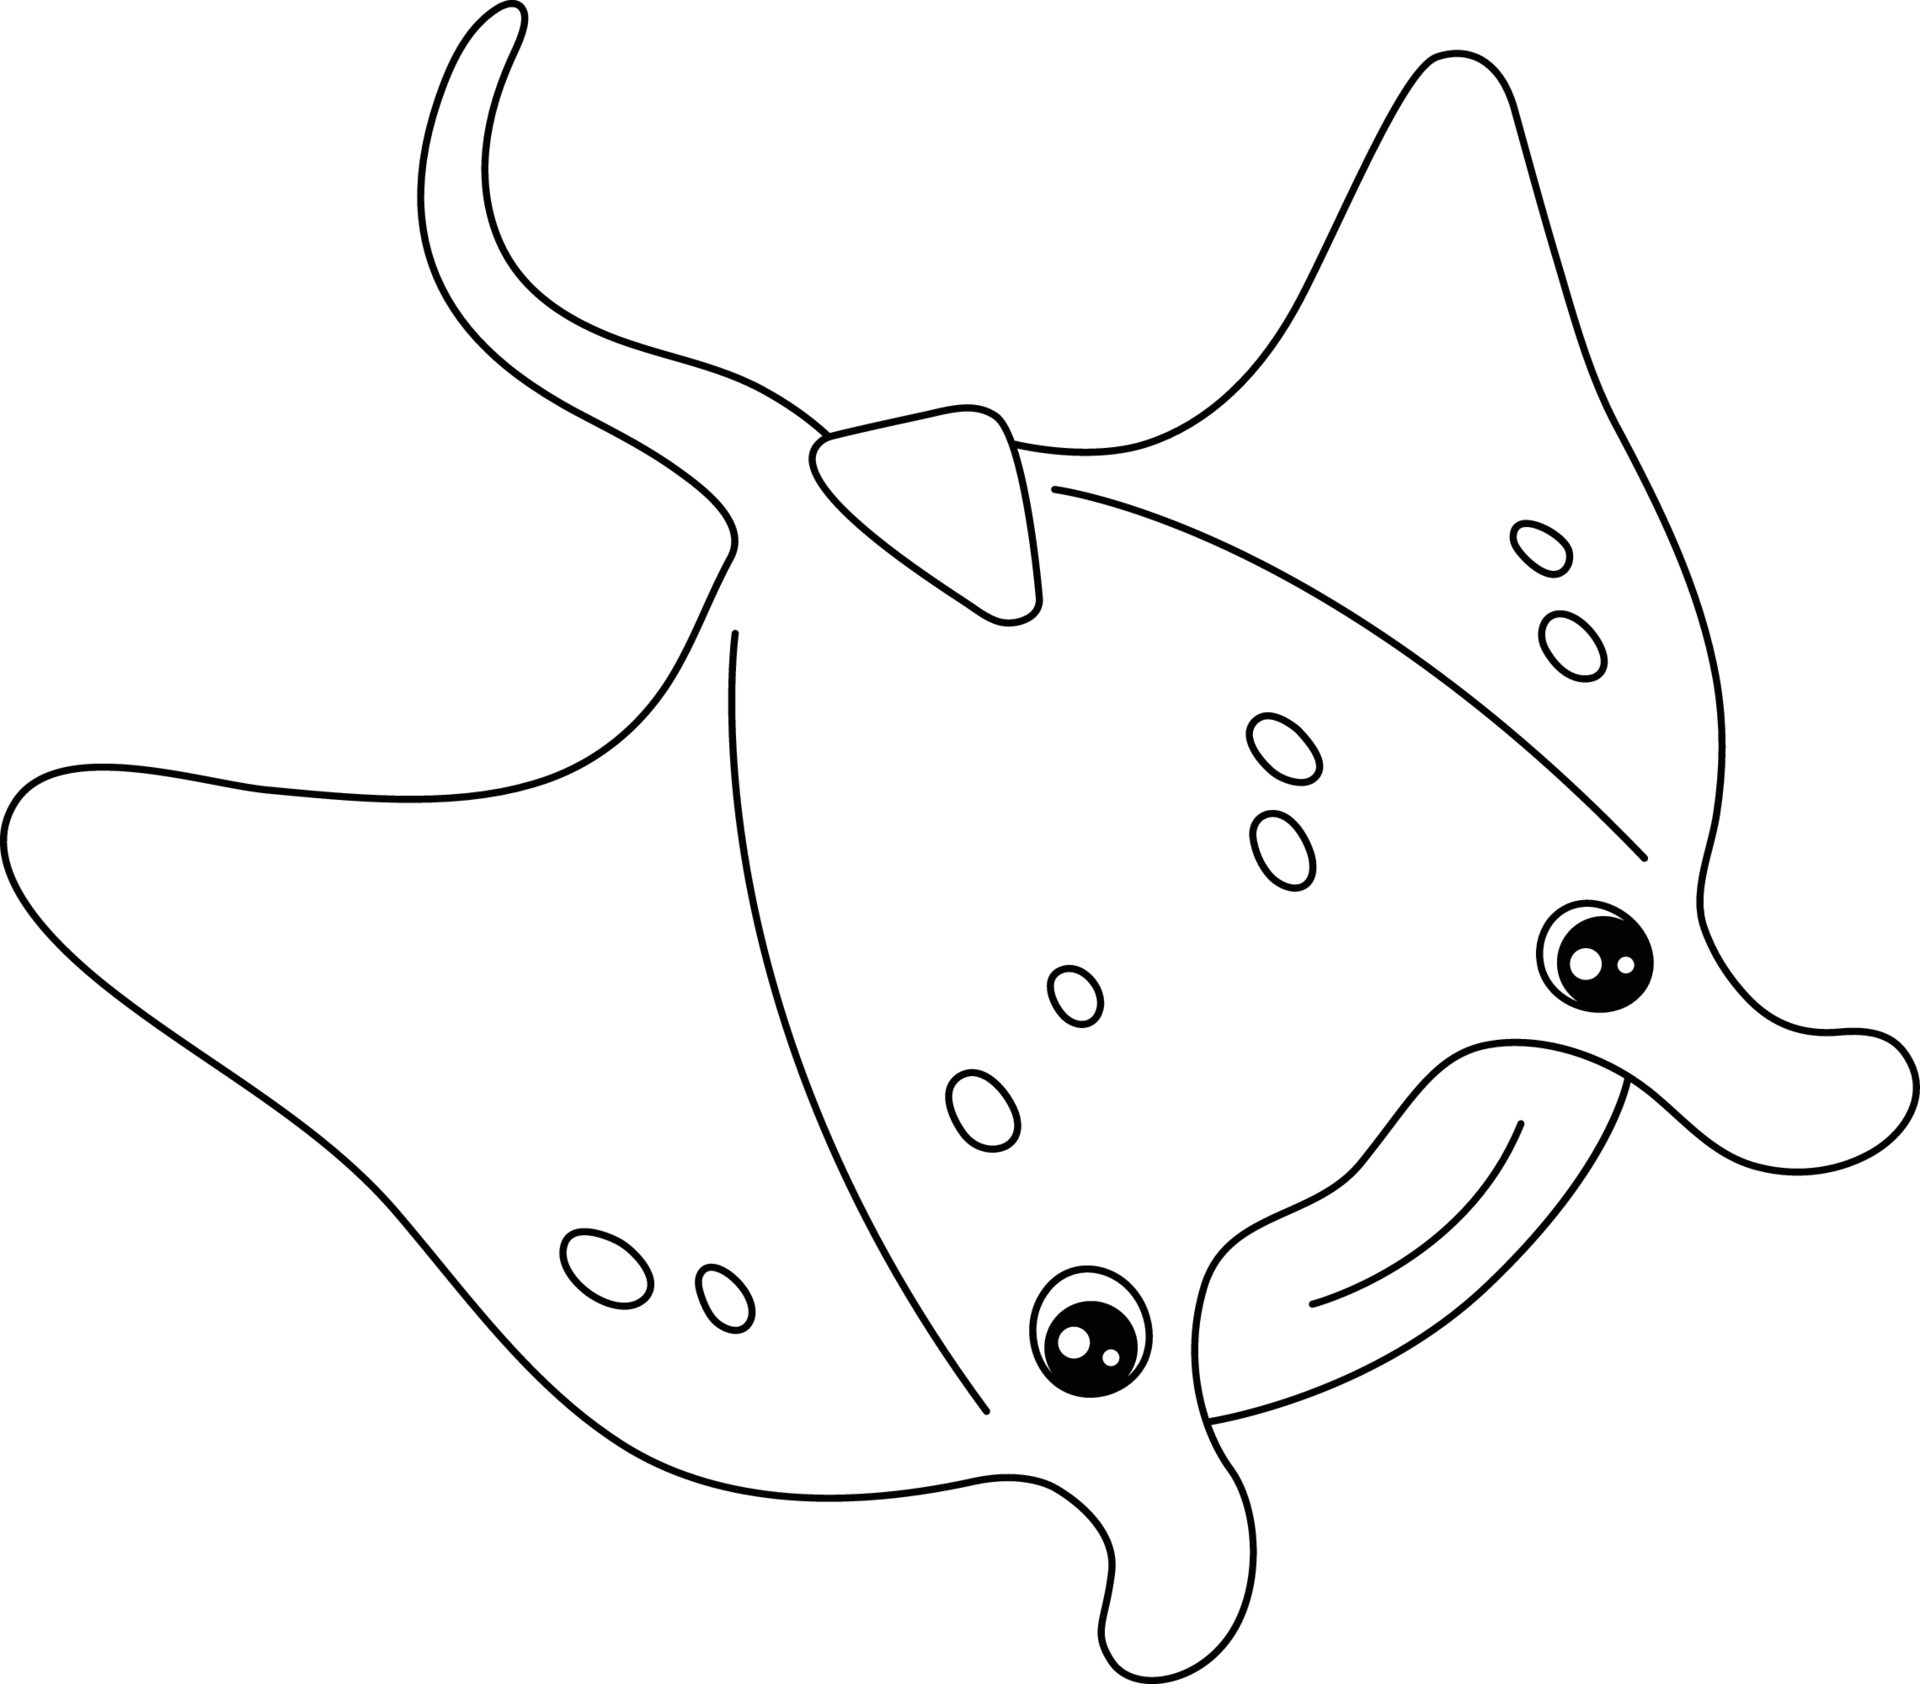 Manta Ray Coloring Pages https://ift.tt/tTqxyEW